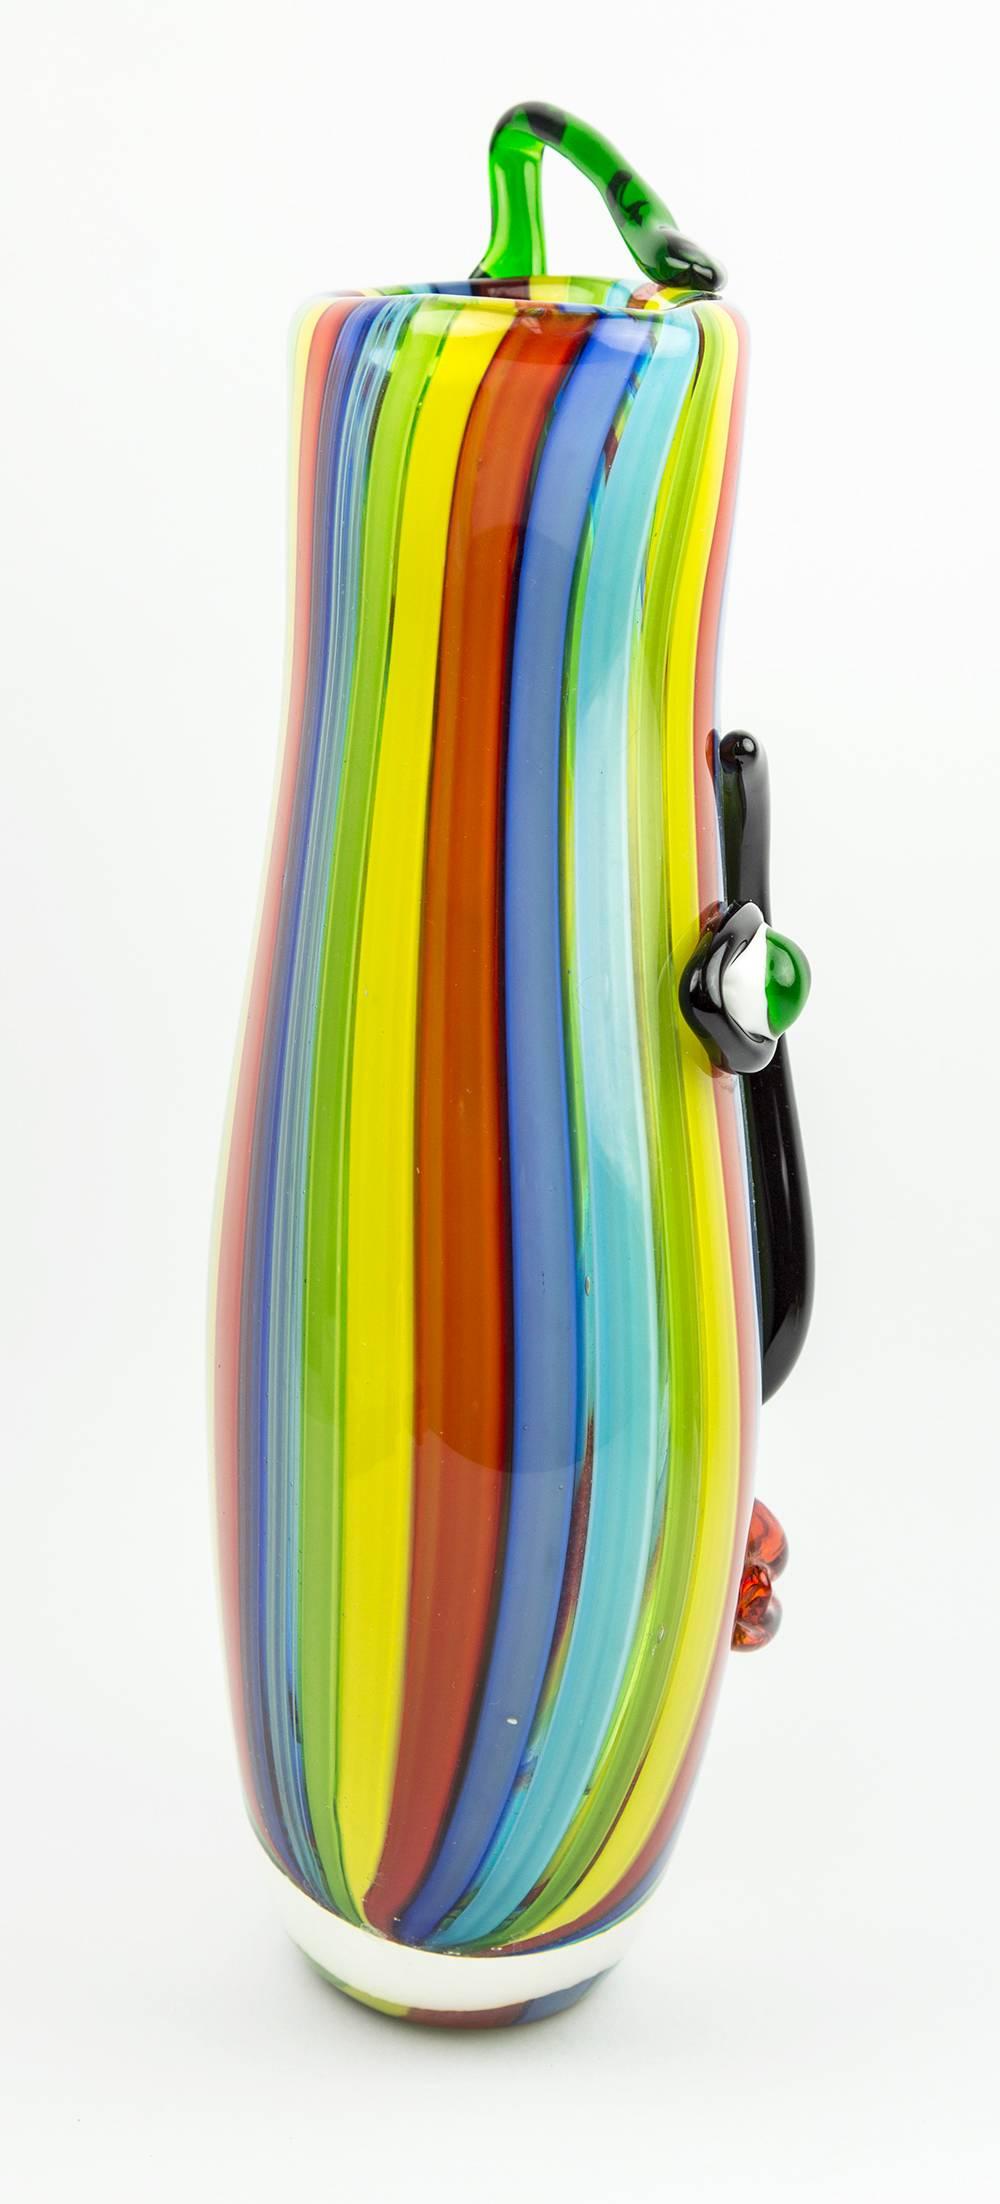 Large rare world class Picasso abstract style art glass, multicolored ‘a cane’ style strands within the clear glass, distinctive face design with outer murrine facial features and flamboyant design; Oscar Zanetti designs. An exceptional and very